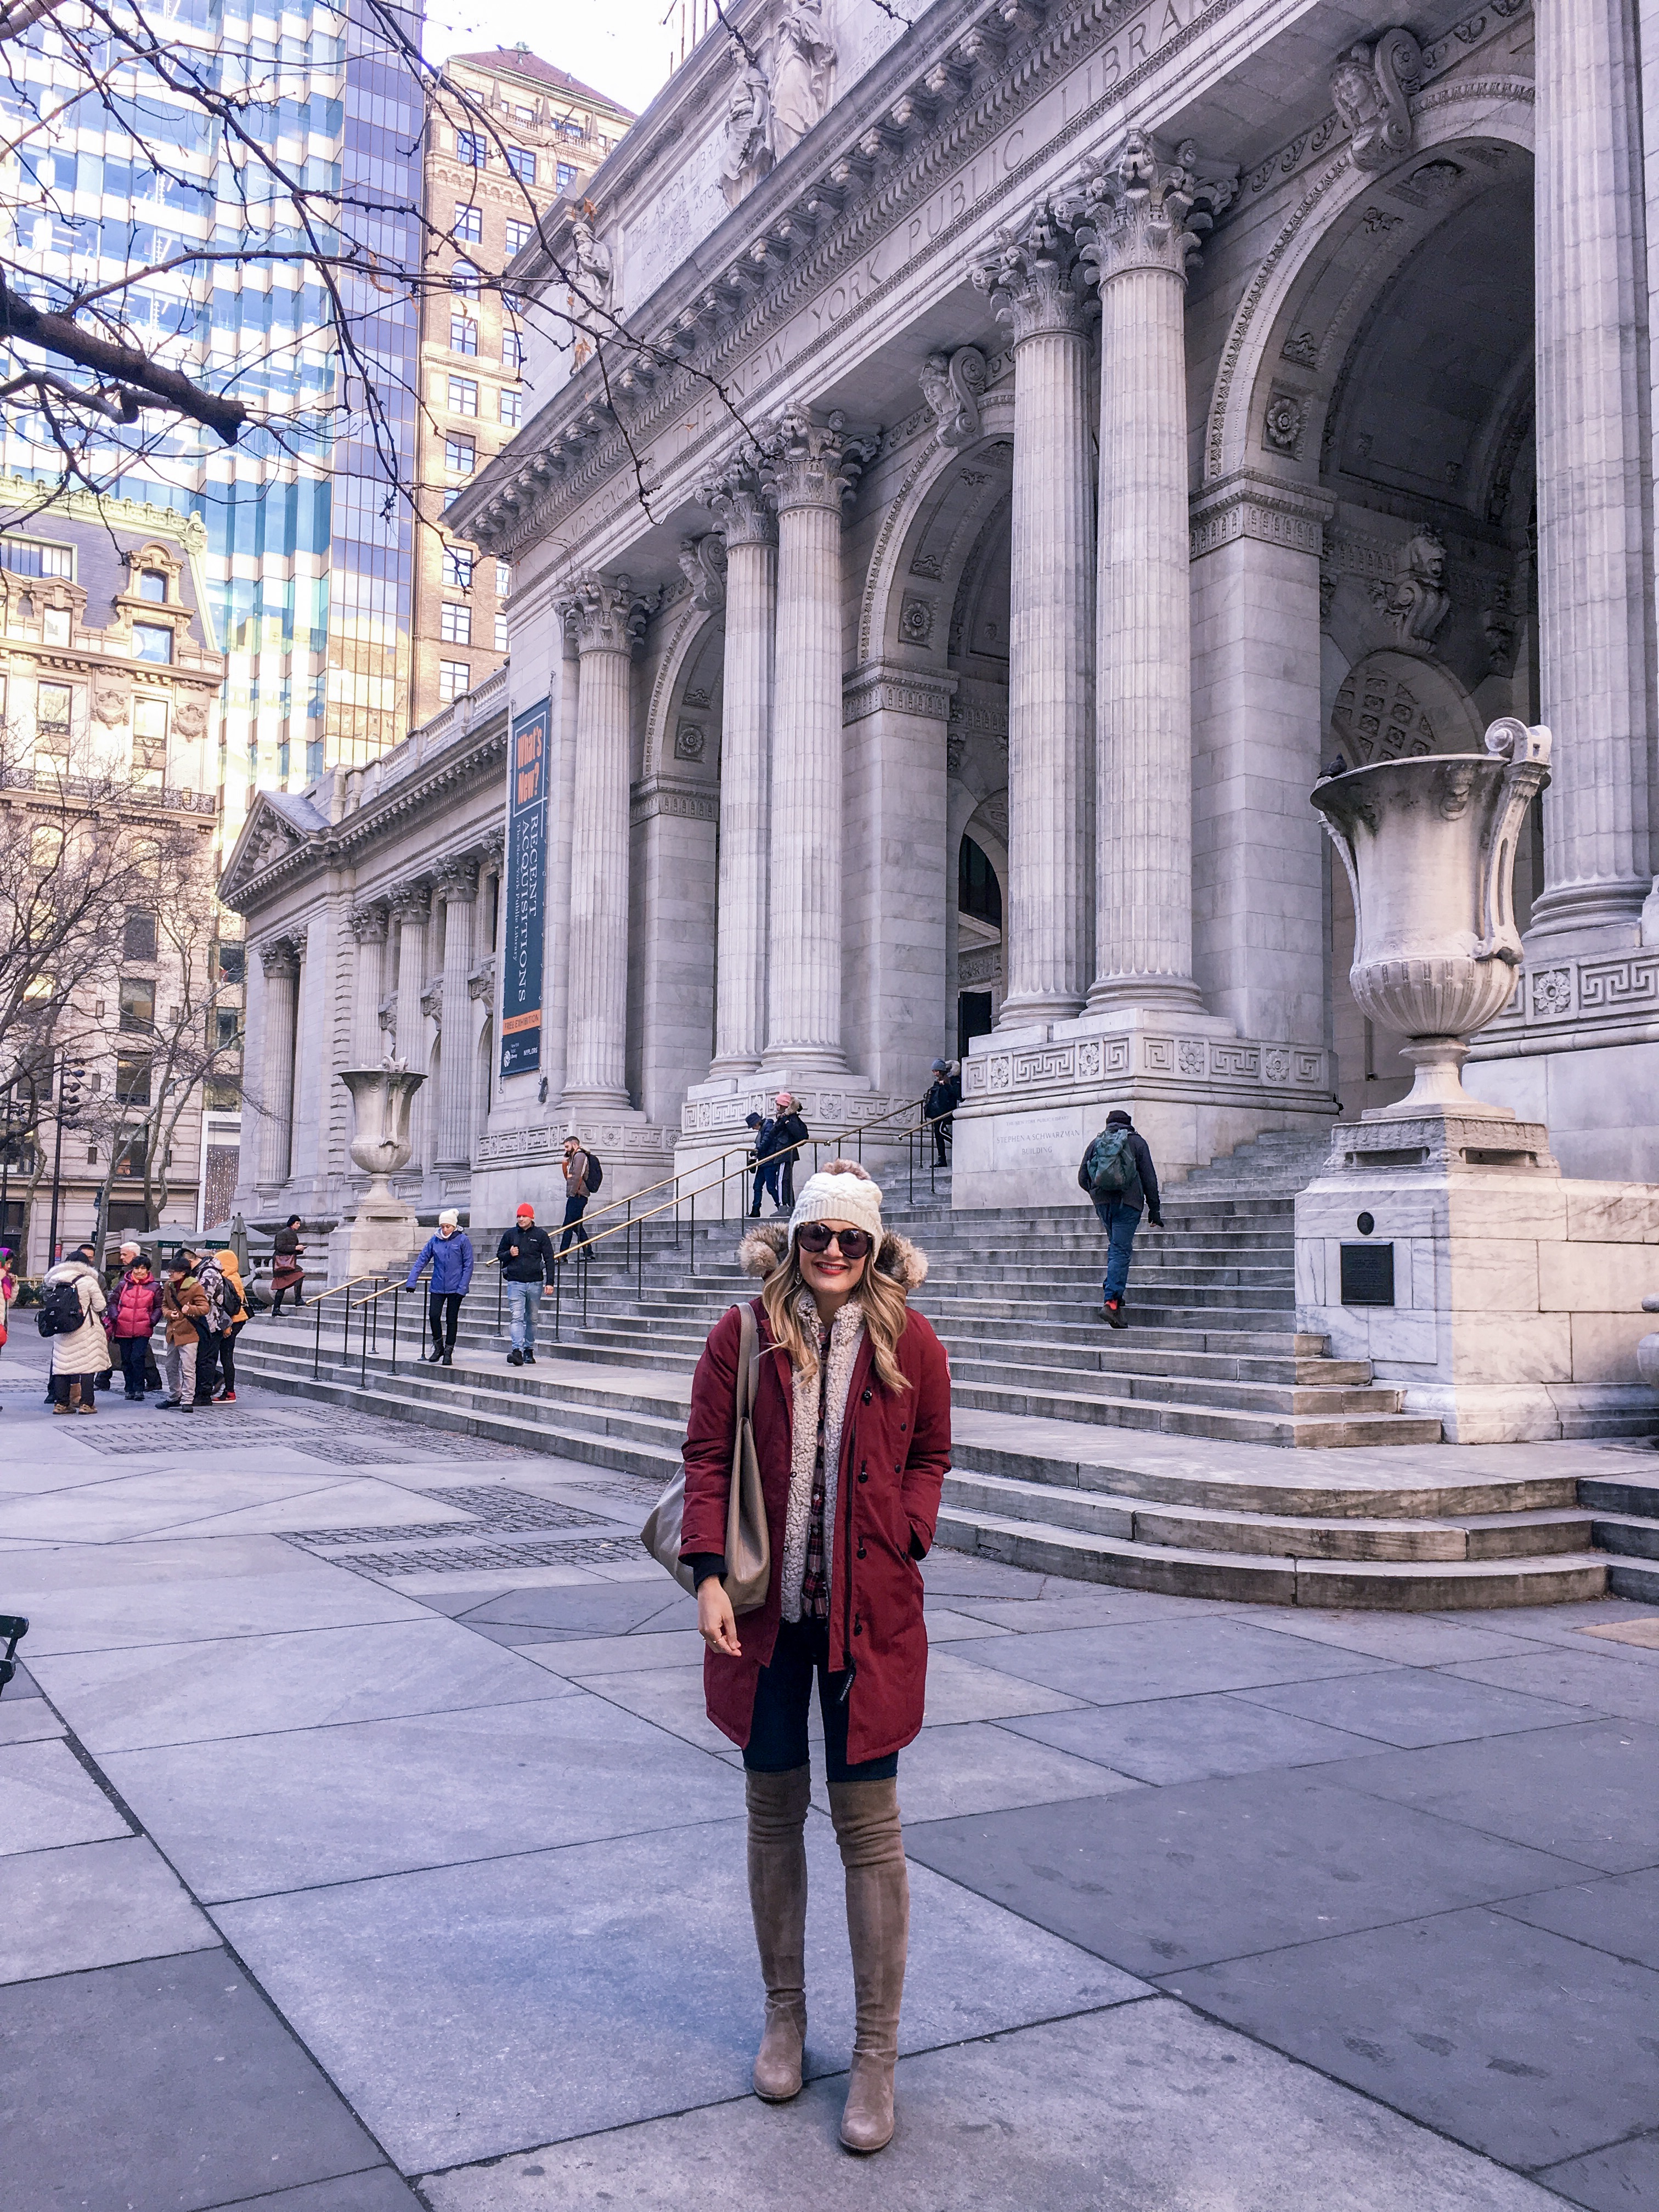 new york city travel guide - A Weekend In New York by popular Chicago travel blogger Visions of Vogue